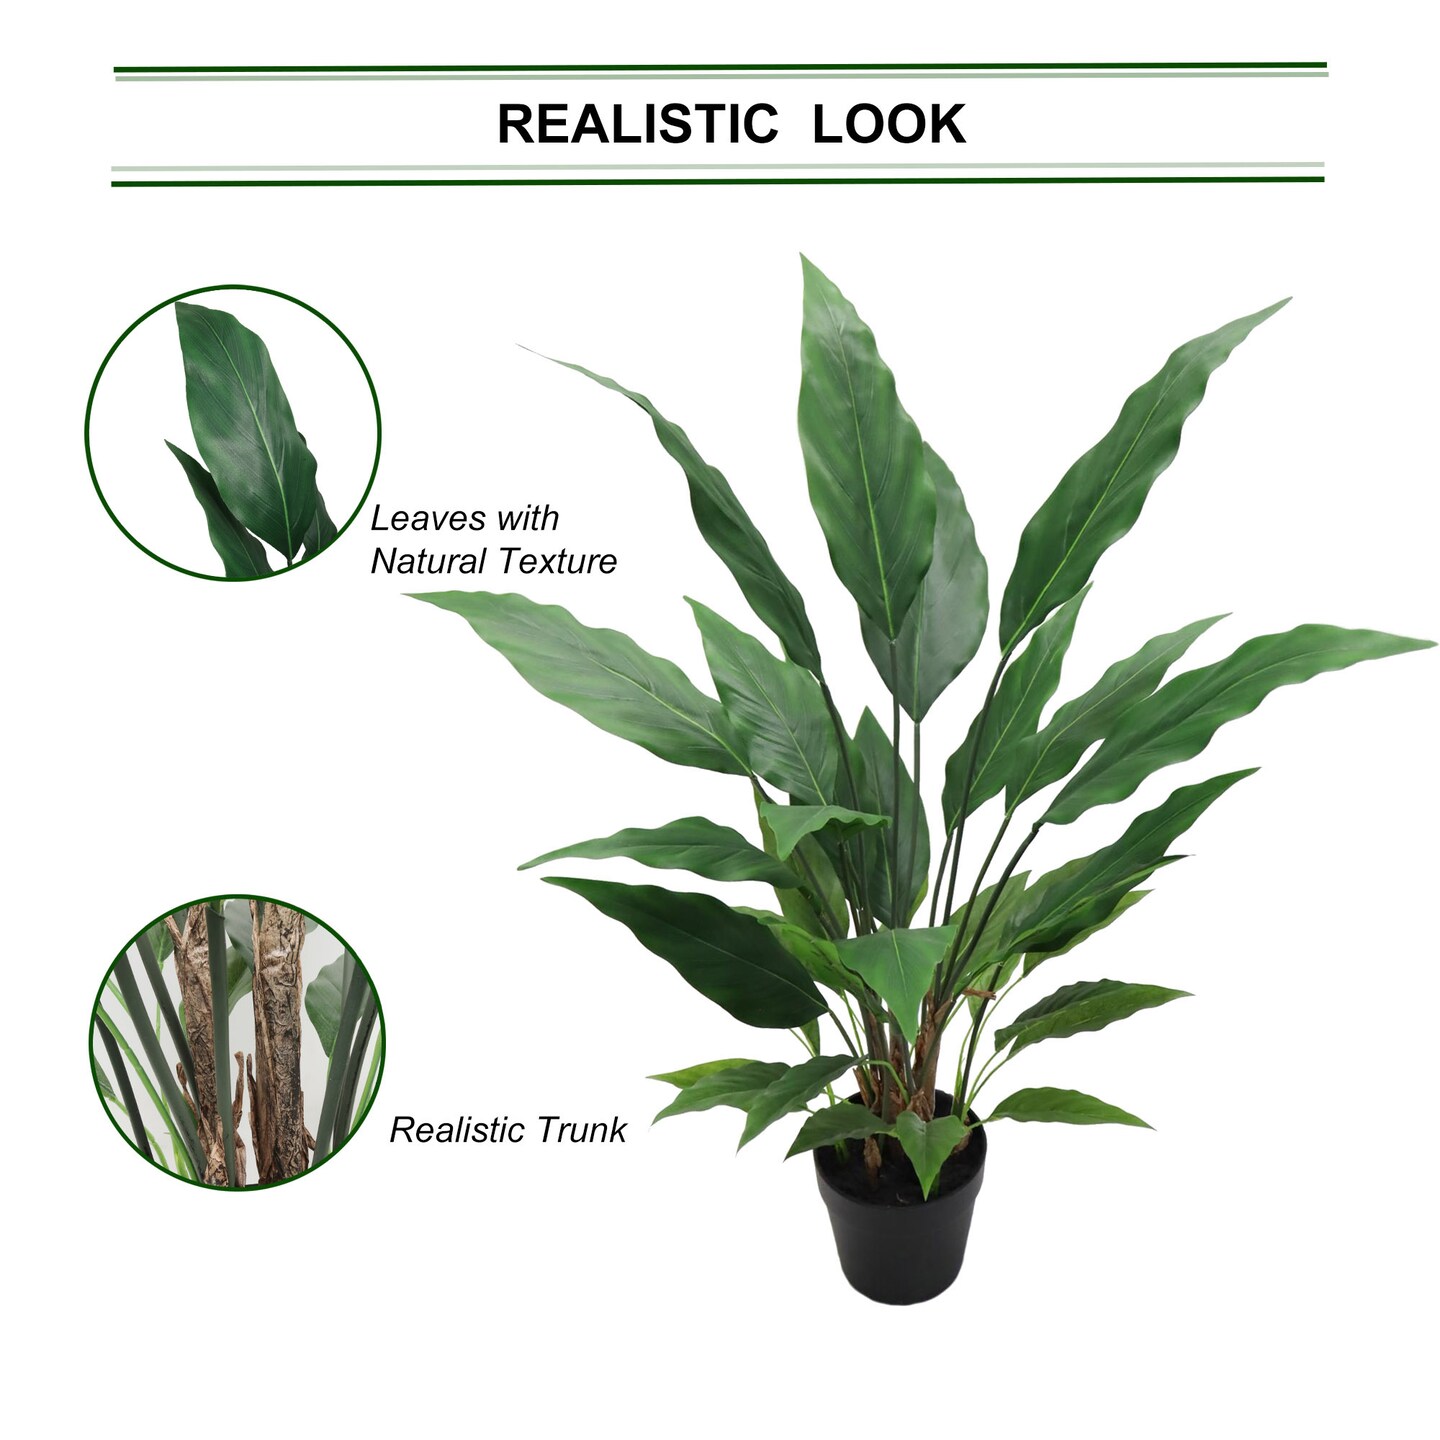 3ft Green Spathiphyllum Plant with 36 Silk Leaves by Floral Home&#xAE;